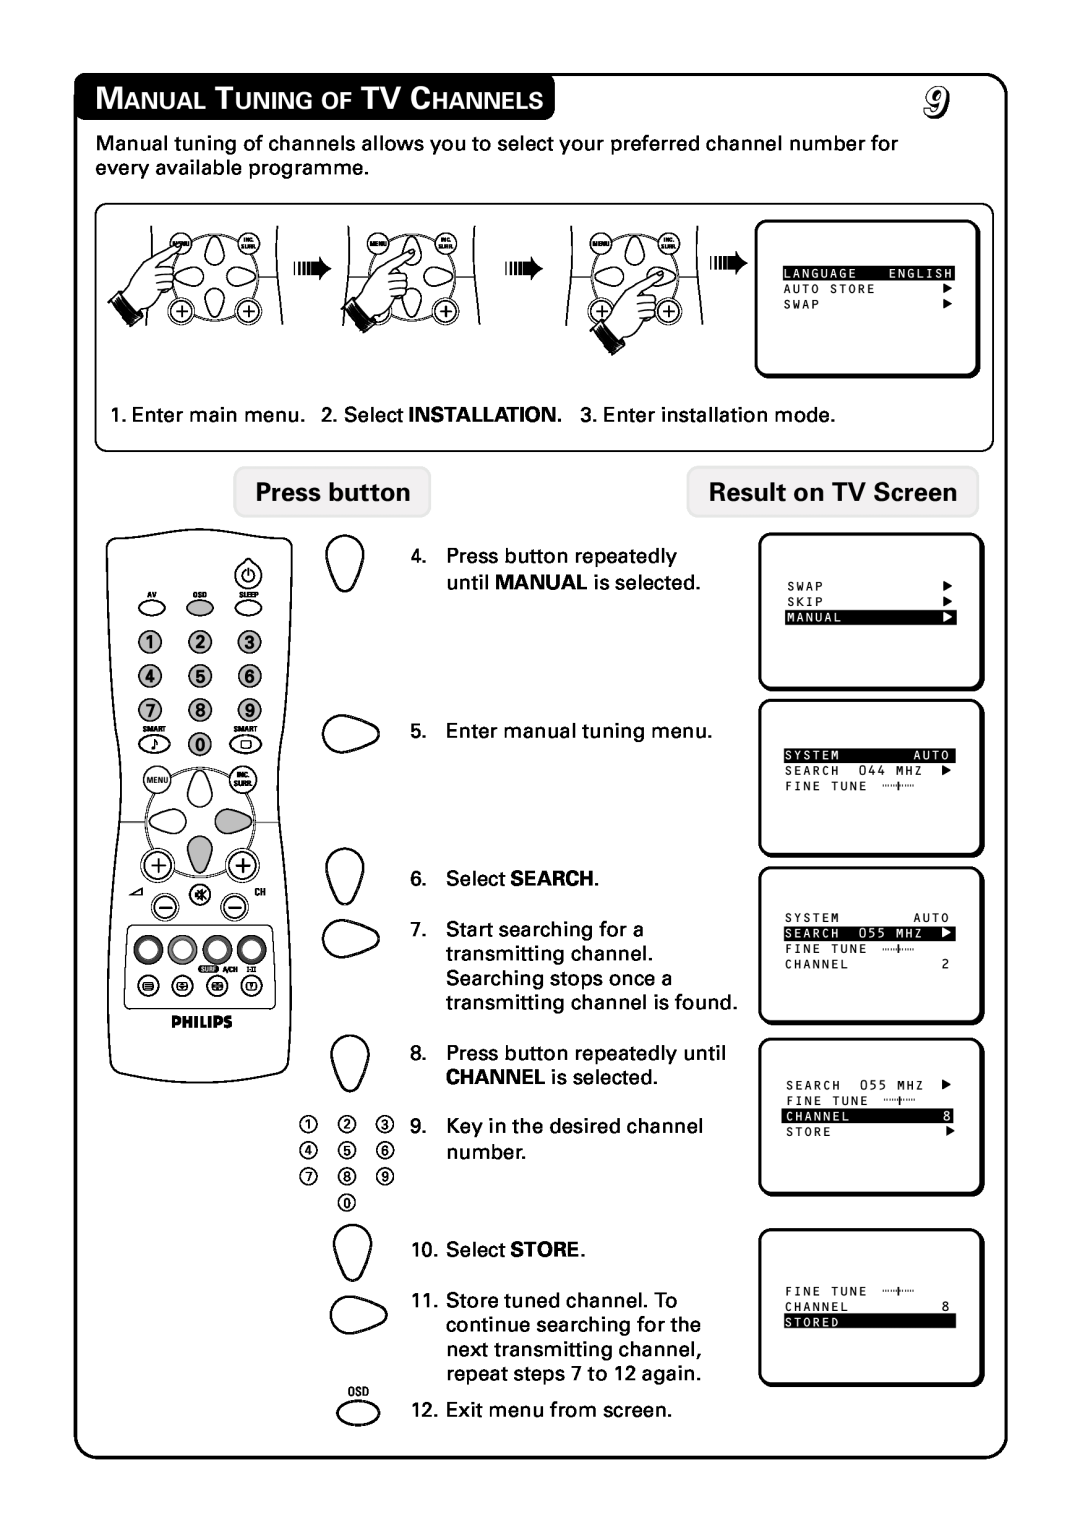 Philips 21PT1582, 20PT1582, 14PT1582 manual Manual Tuning Of Tv Channels, Press button, Result on TV Screen 